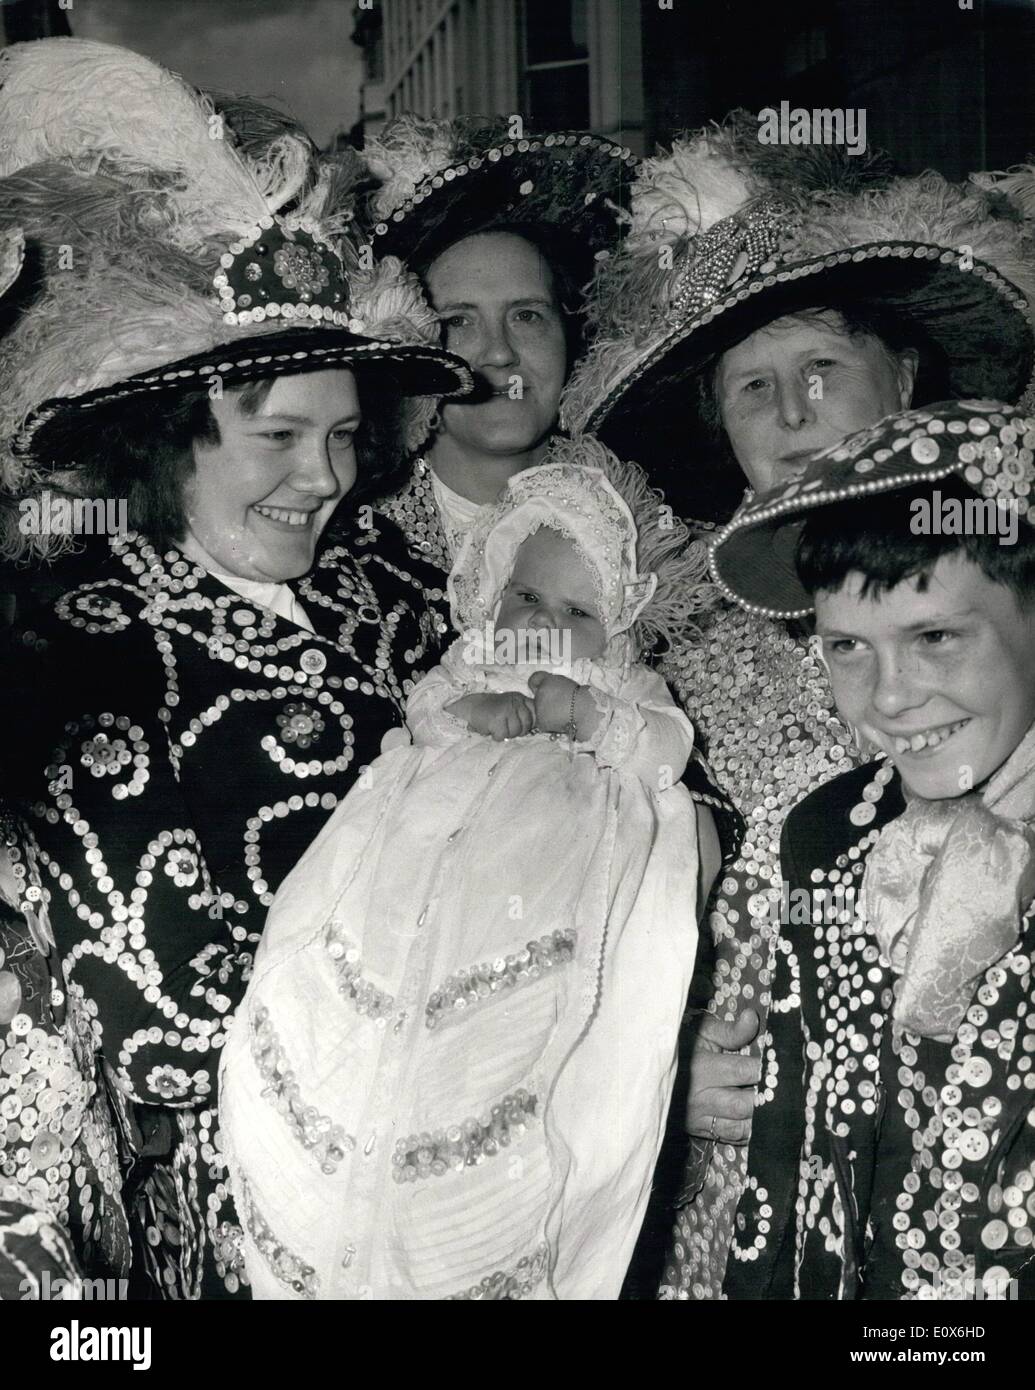 May 05, 1965 - Great-Granddaughter Of London's Festival Of Britain Pearly King IS Christened: Susan O'Shea, the six-month-old Great-grand-daughter of London's Festival of Britain Pearly King, was christened in a robe adorned with 50 buttons at St. Martin-in-the-Fields today. It was made for her great-grandfather towards the end of the last century. All the famous Marriott family now wear the robe for their christenings. Baby Susan was christened by the Rev. Austen Williams, who usually conducts the Pearlies' annual harvest festival service. Photo shows Mrs Stock Photo